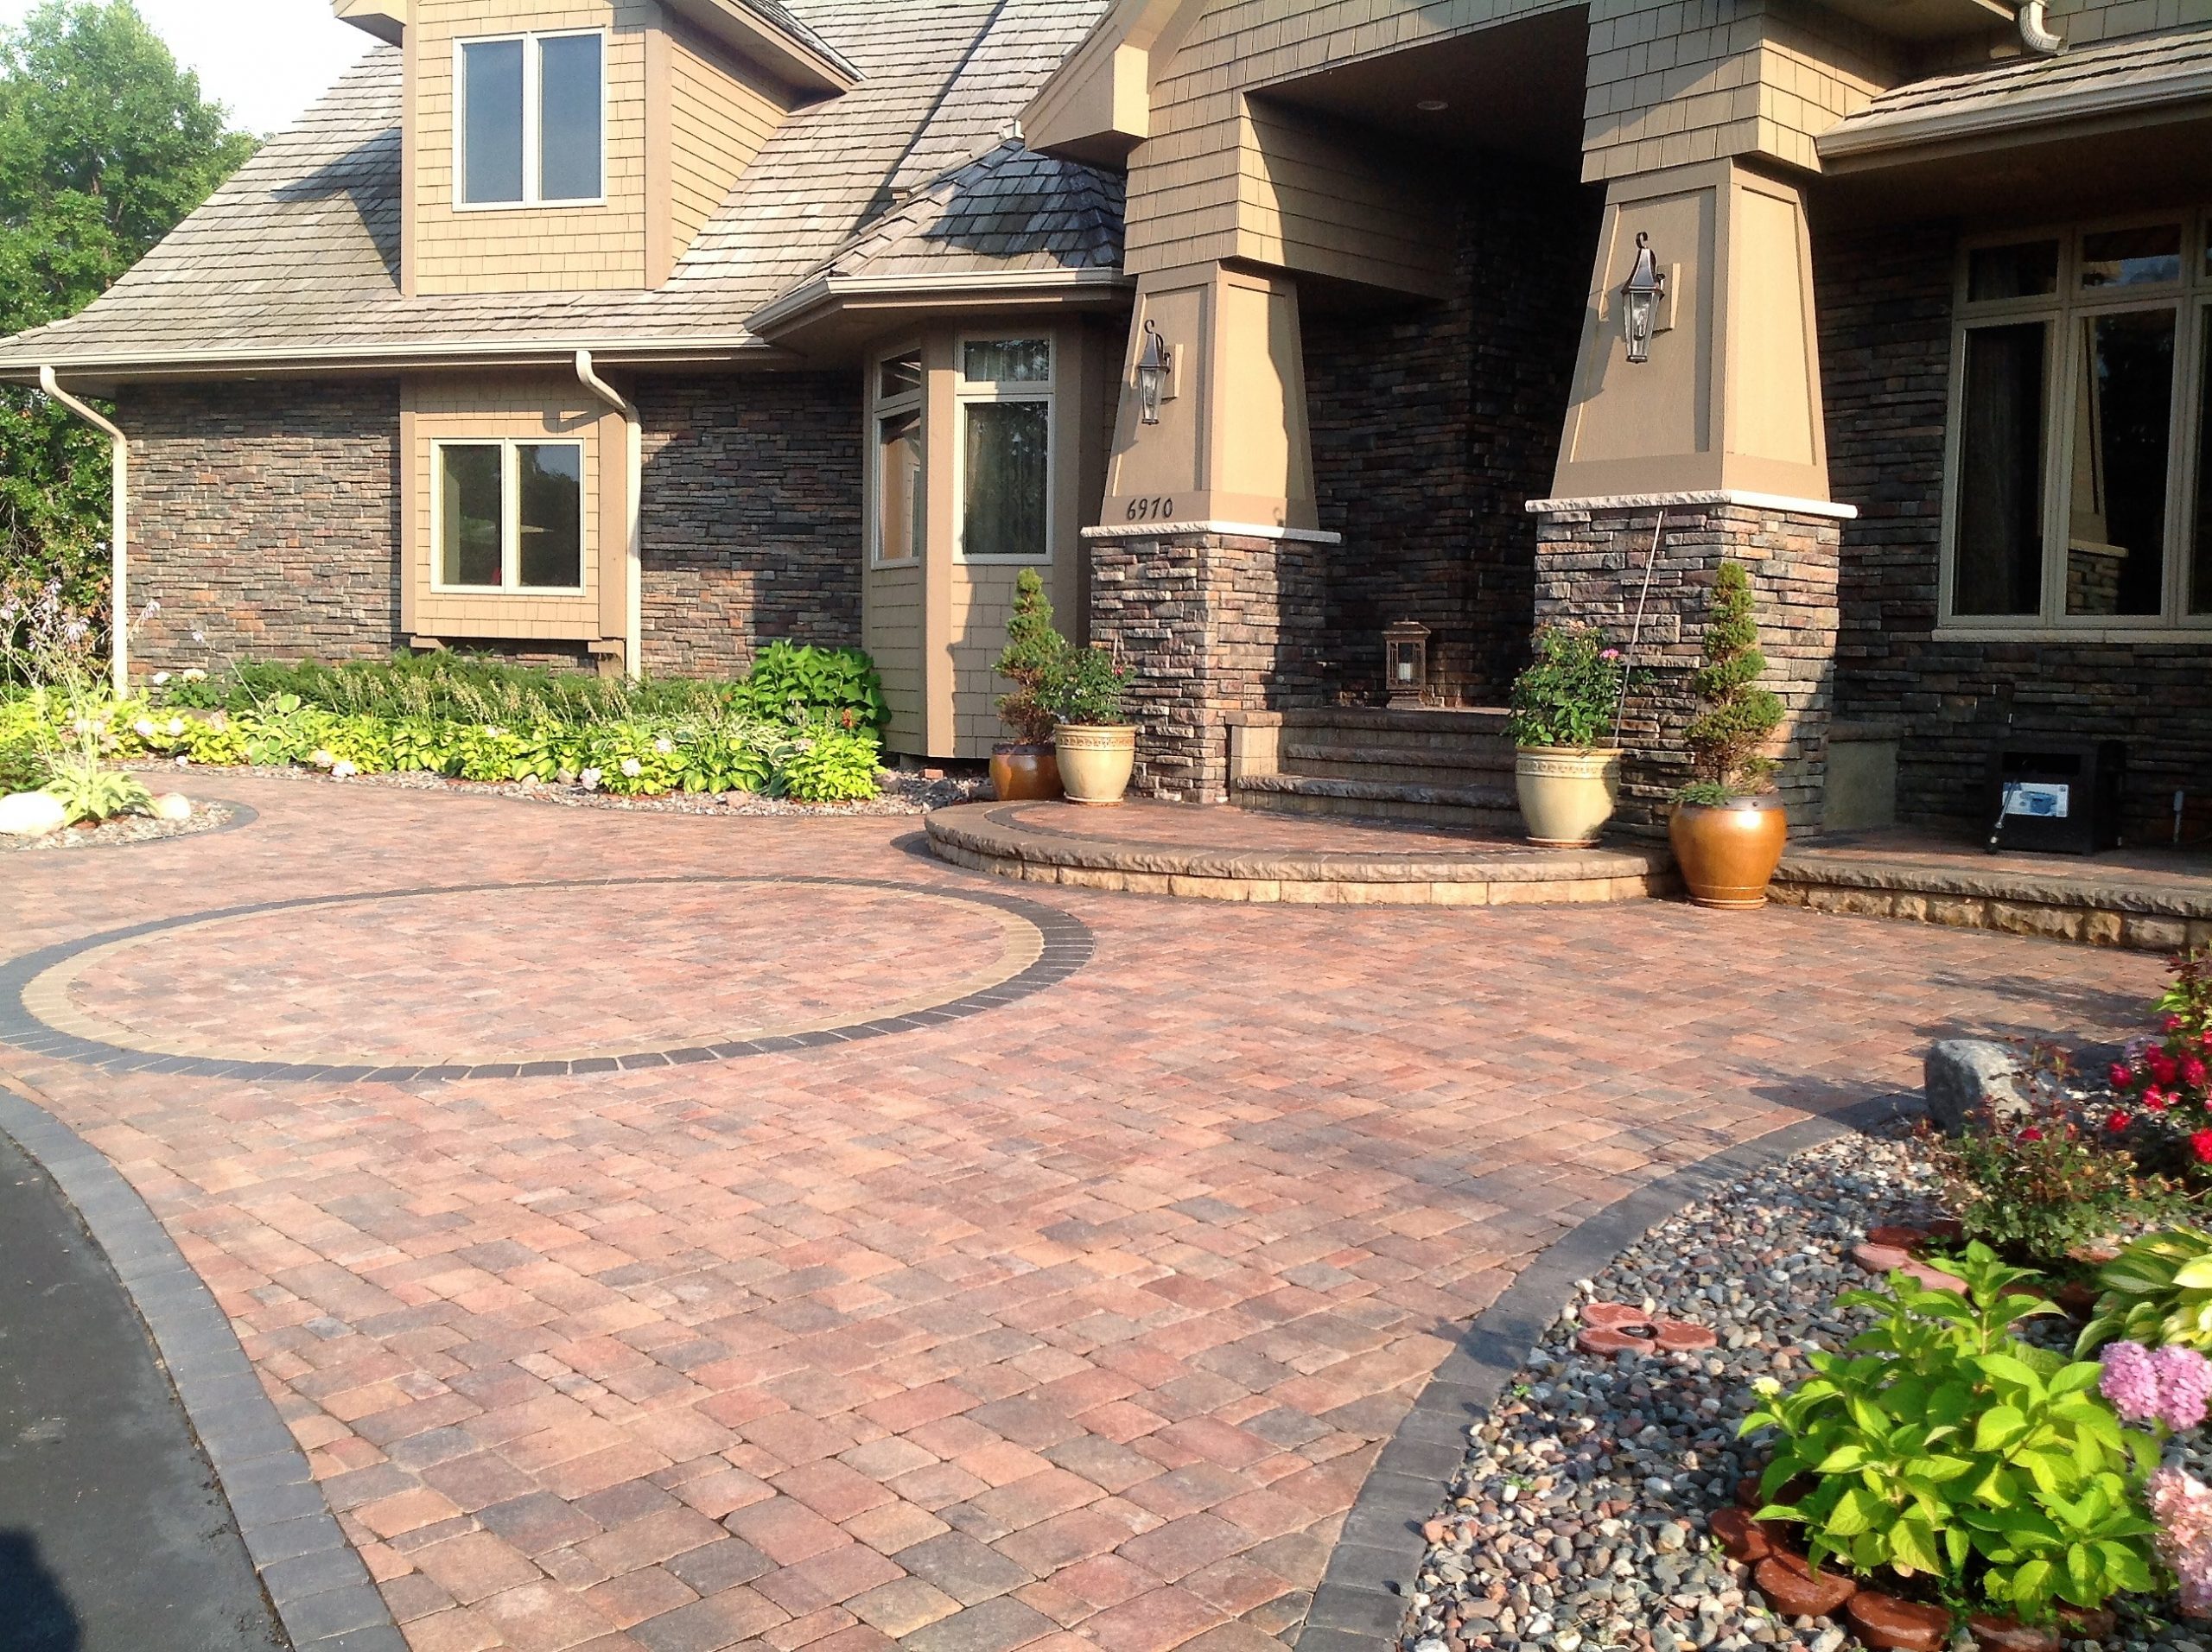 Paver Block Floor At House Entrance